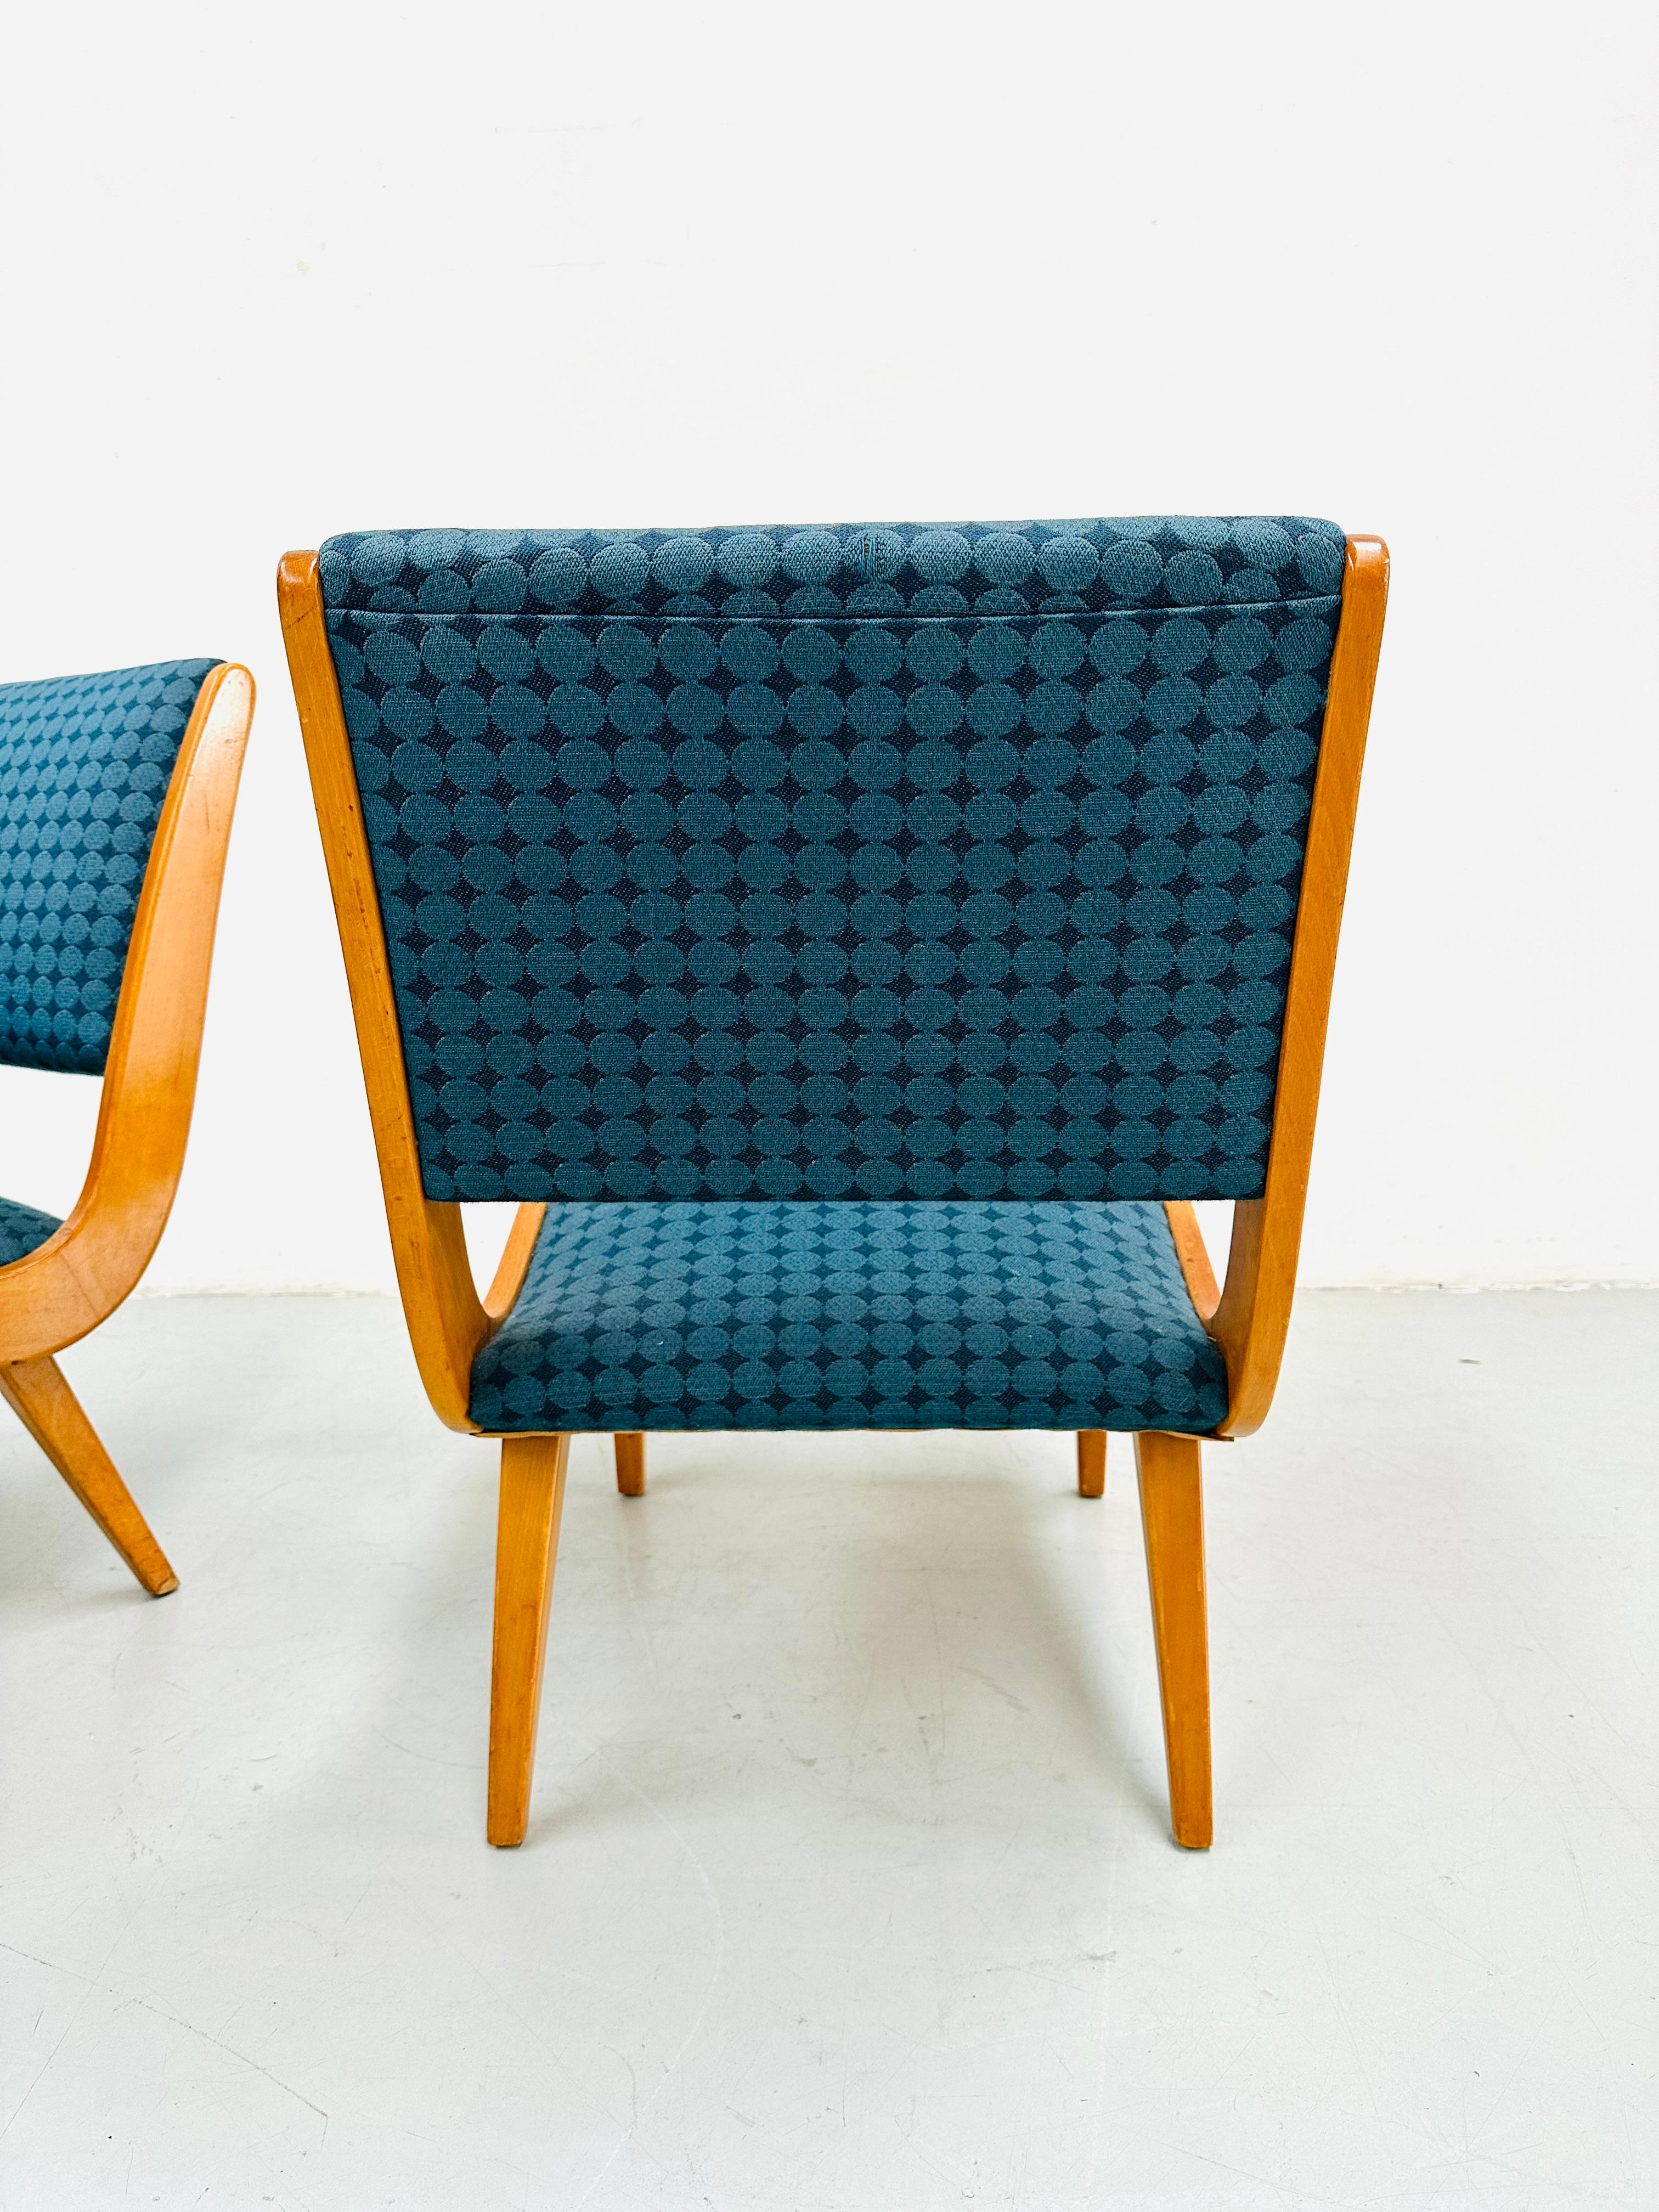 1950s Rare Set Vostra Chairs Numbered & Original Fabric by Jens Risom for Knoll. en vente 10